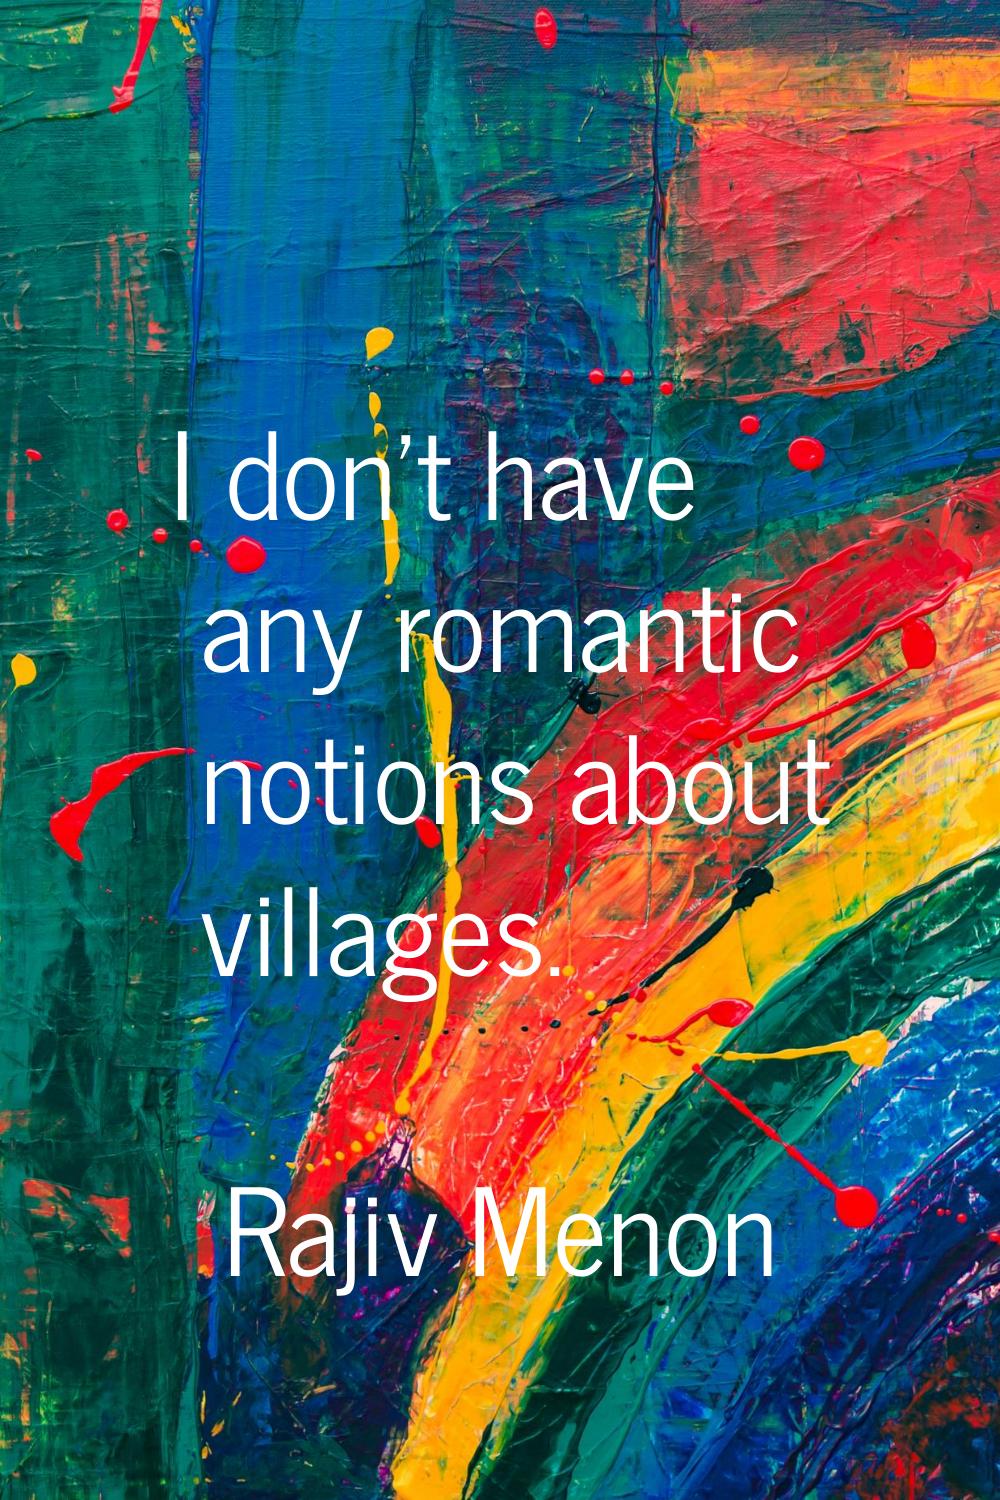 I don't have any romantic notions about villages.